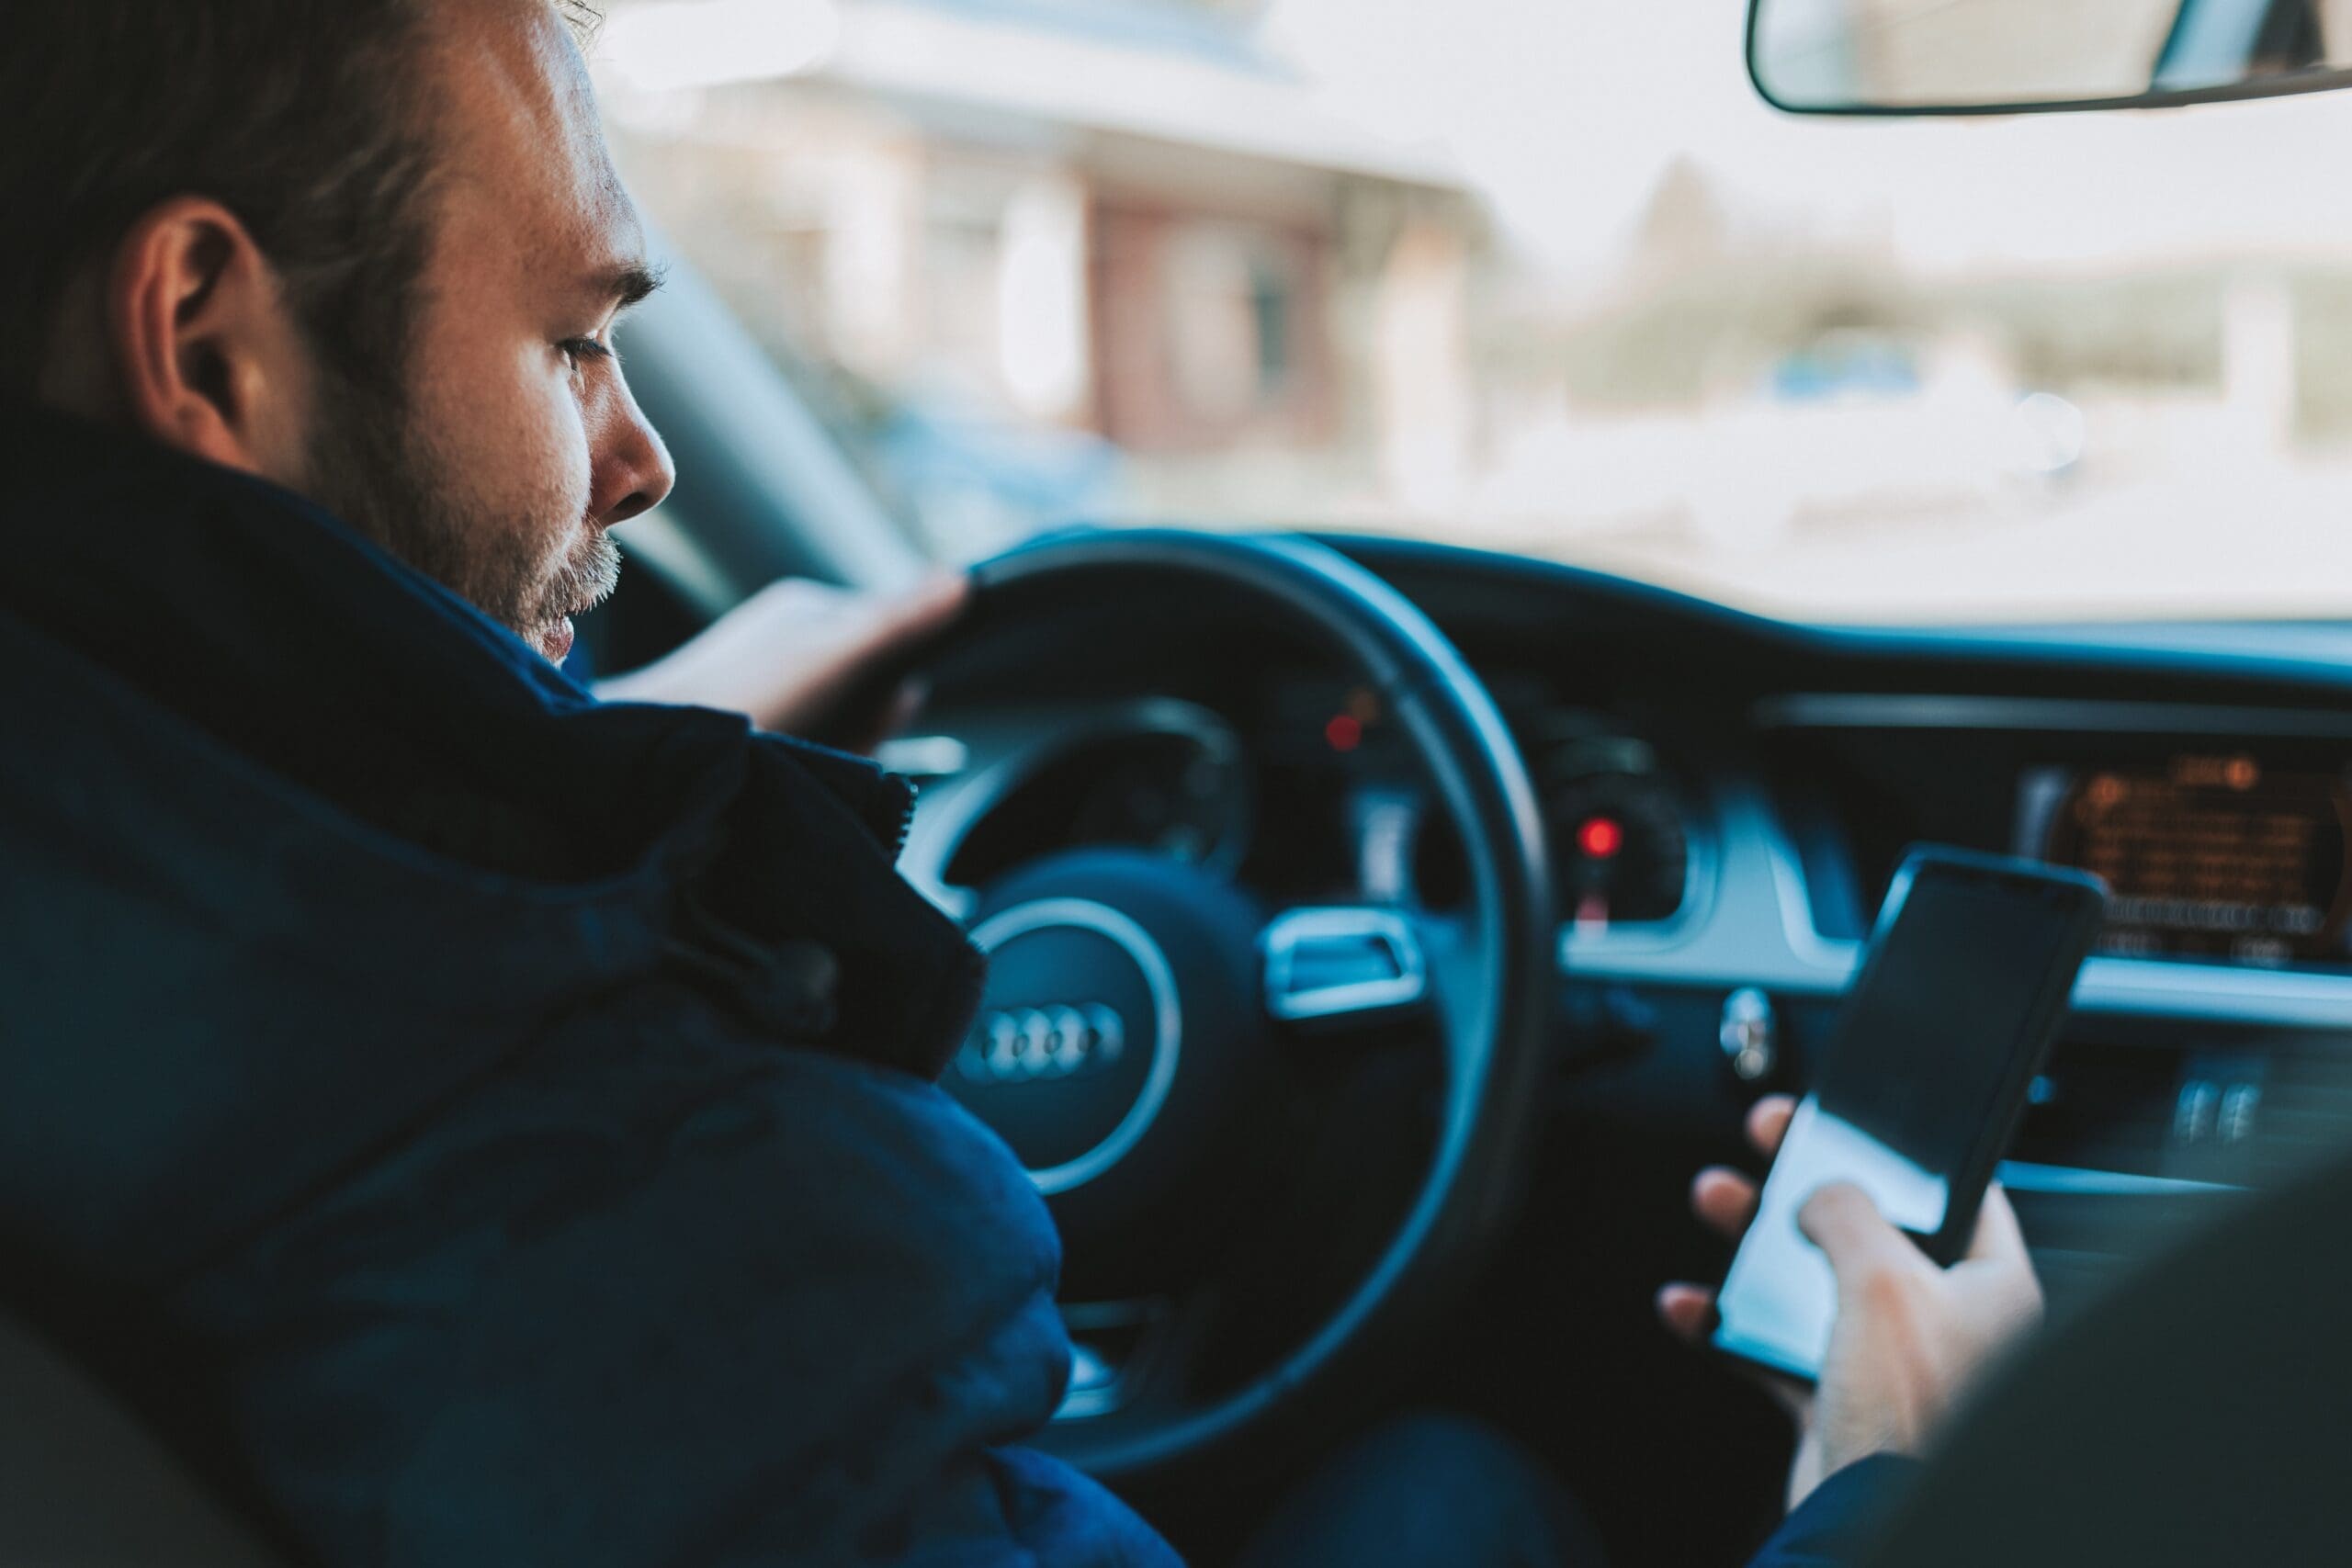 Man looking at cellphone while behind the wheel